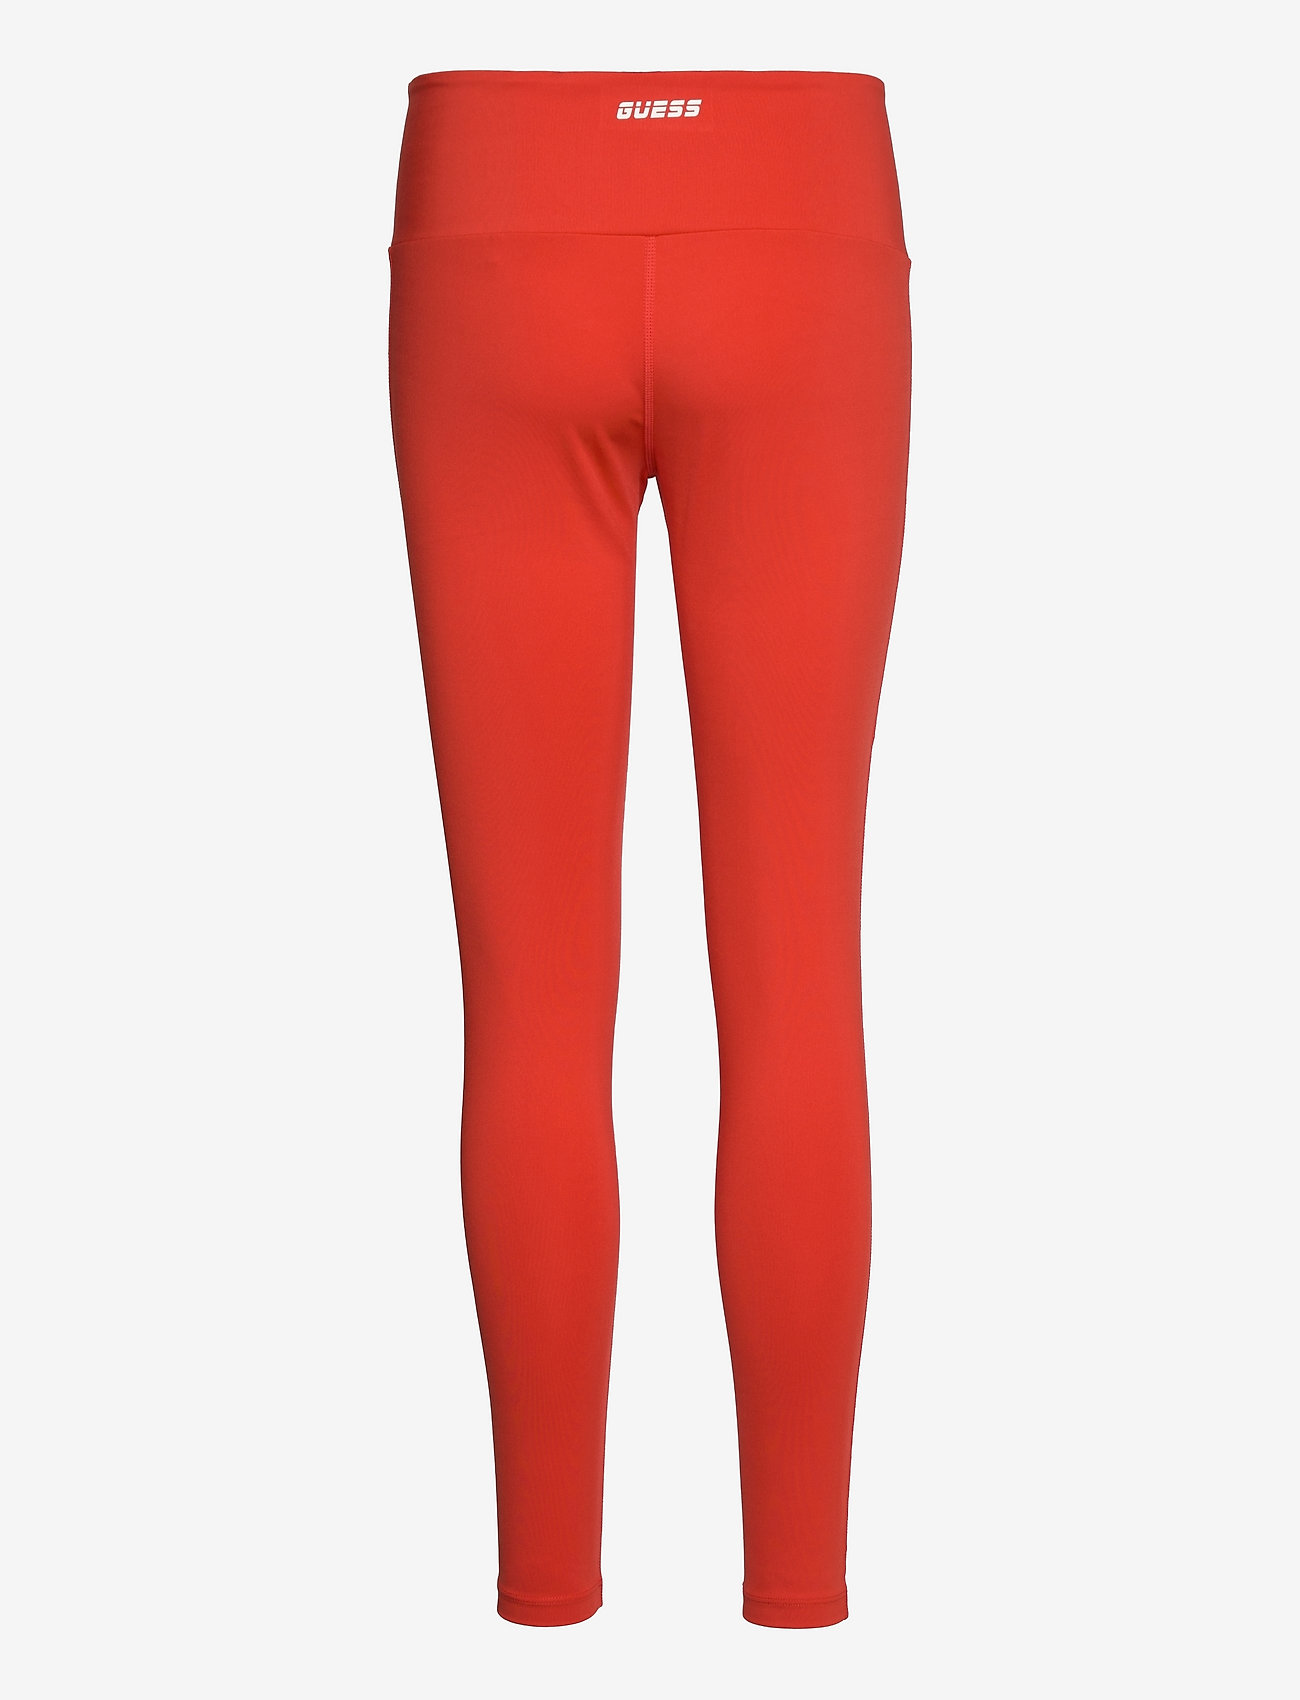 Guess Activewear - AGATHA LEGGINGS 4/4 - lauf-& trainingstights - ardent red - 1